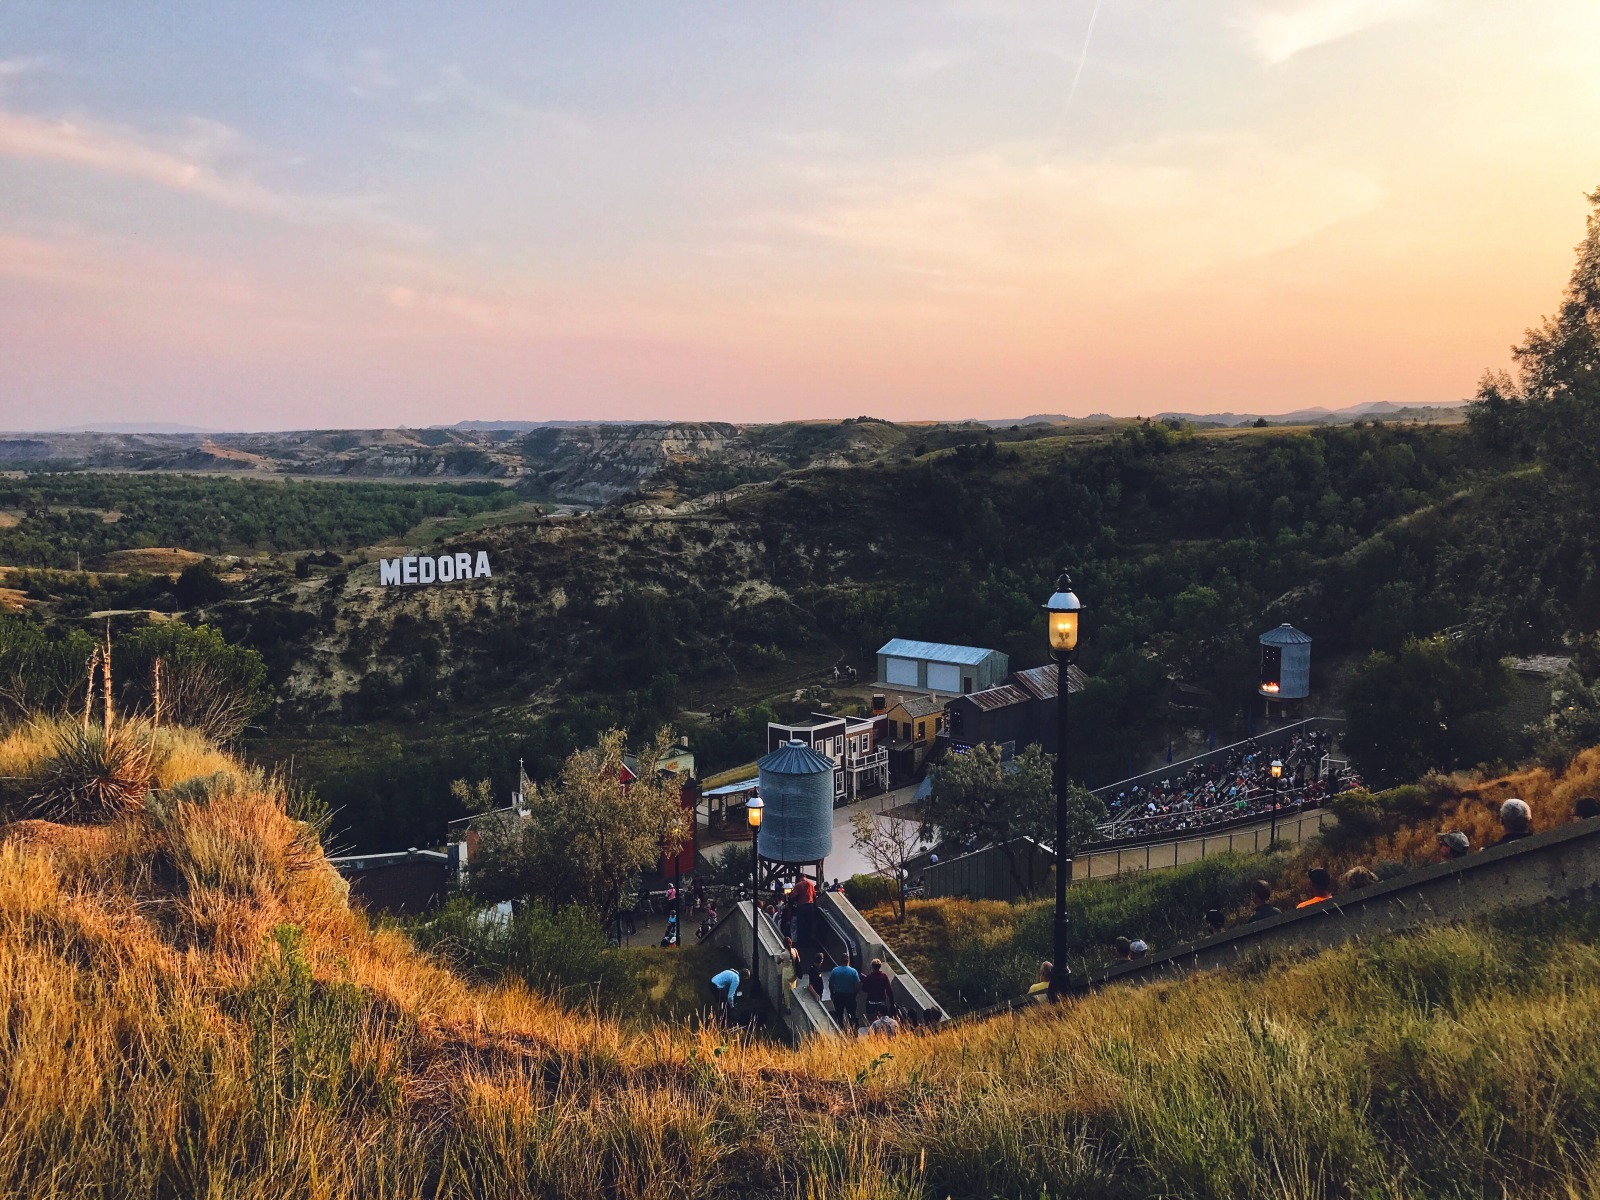 Sightseeing is one of the best things to do in medora north dakota